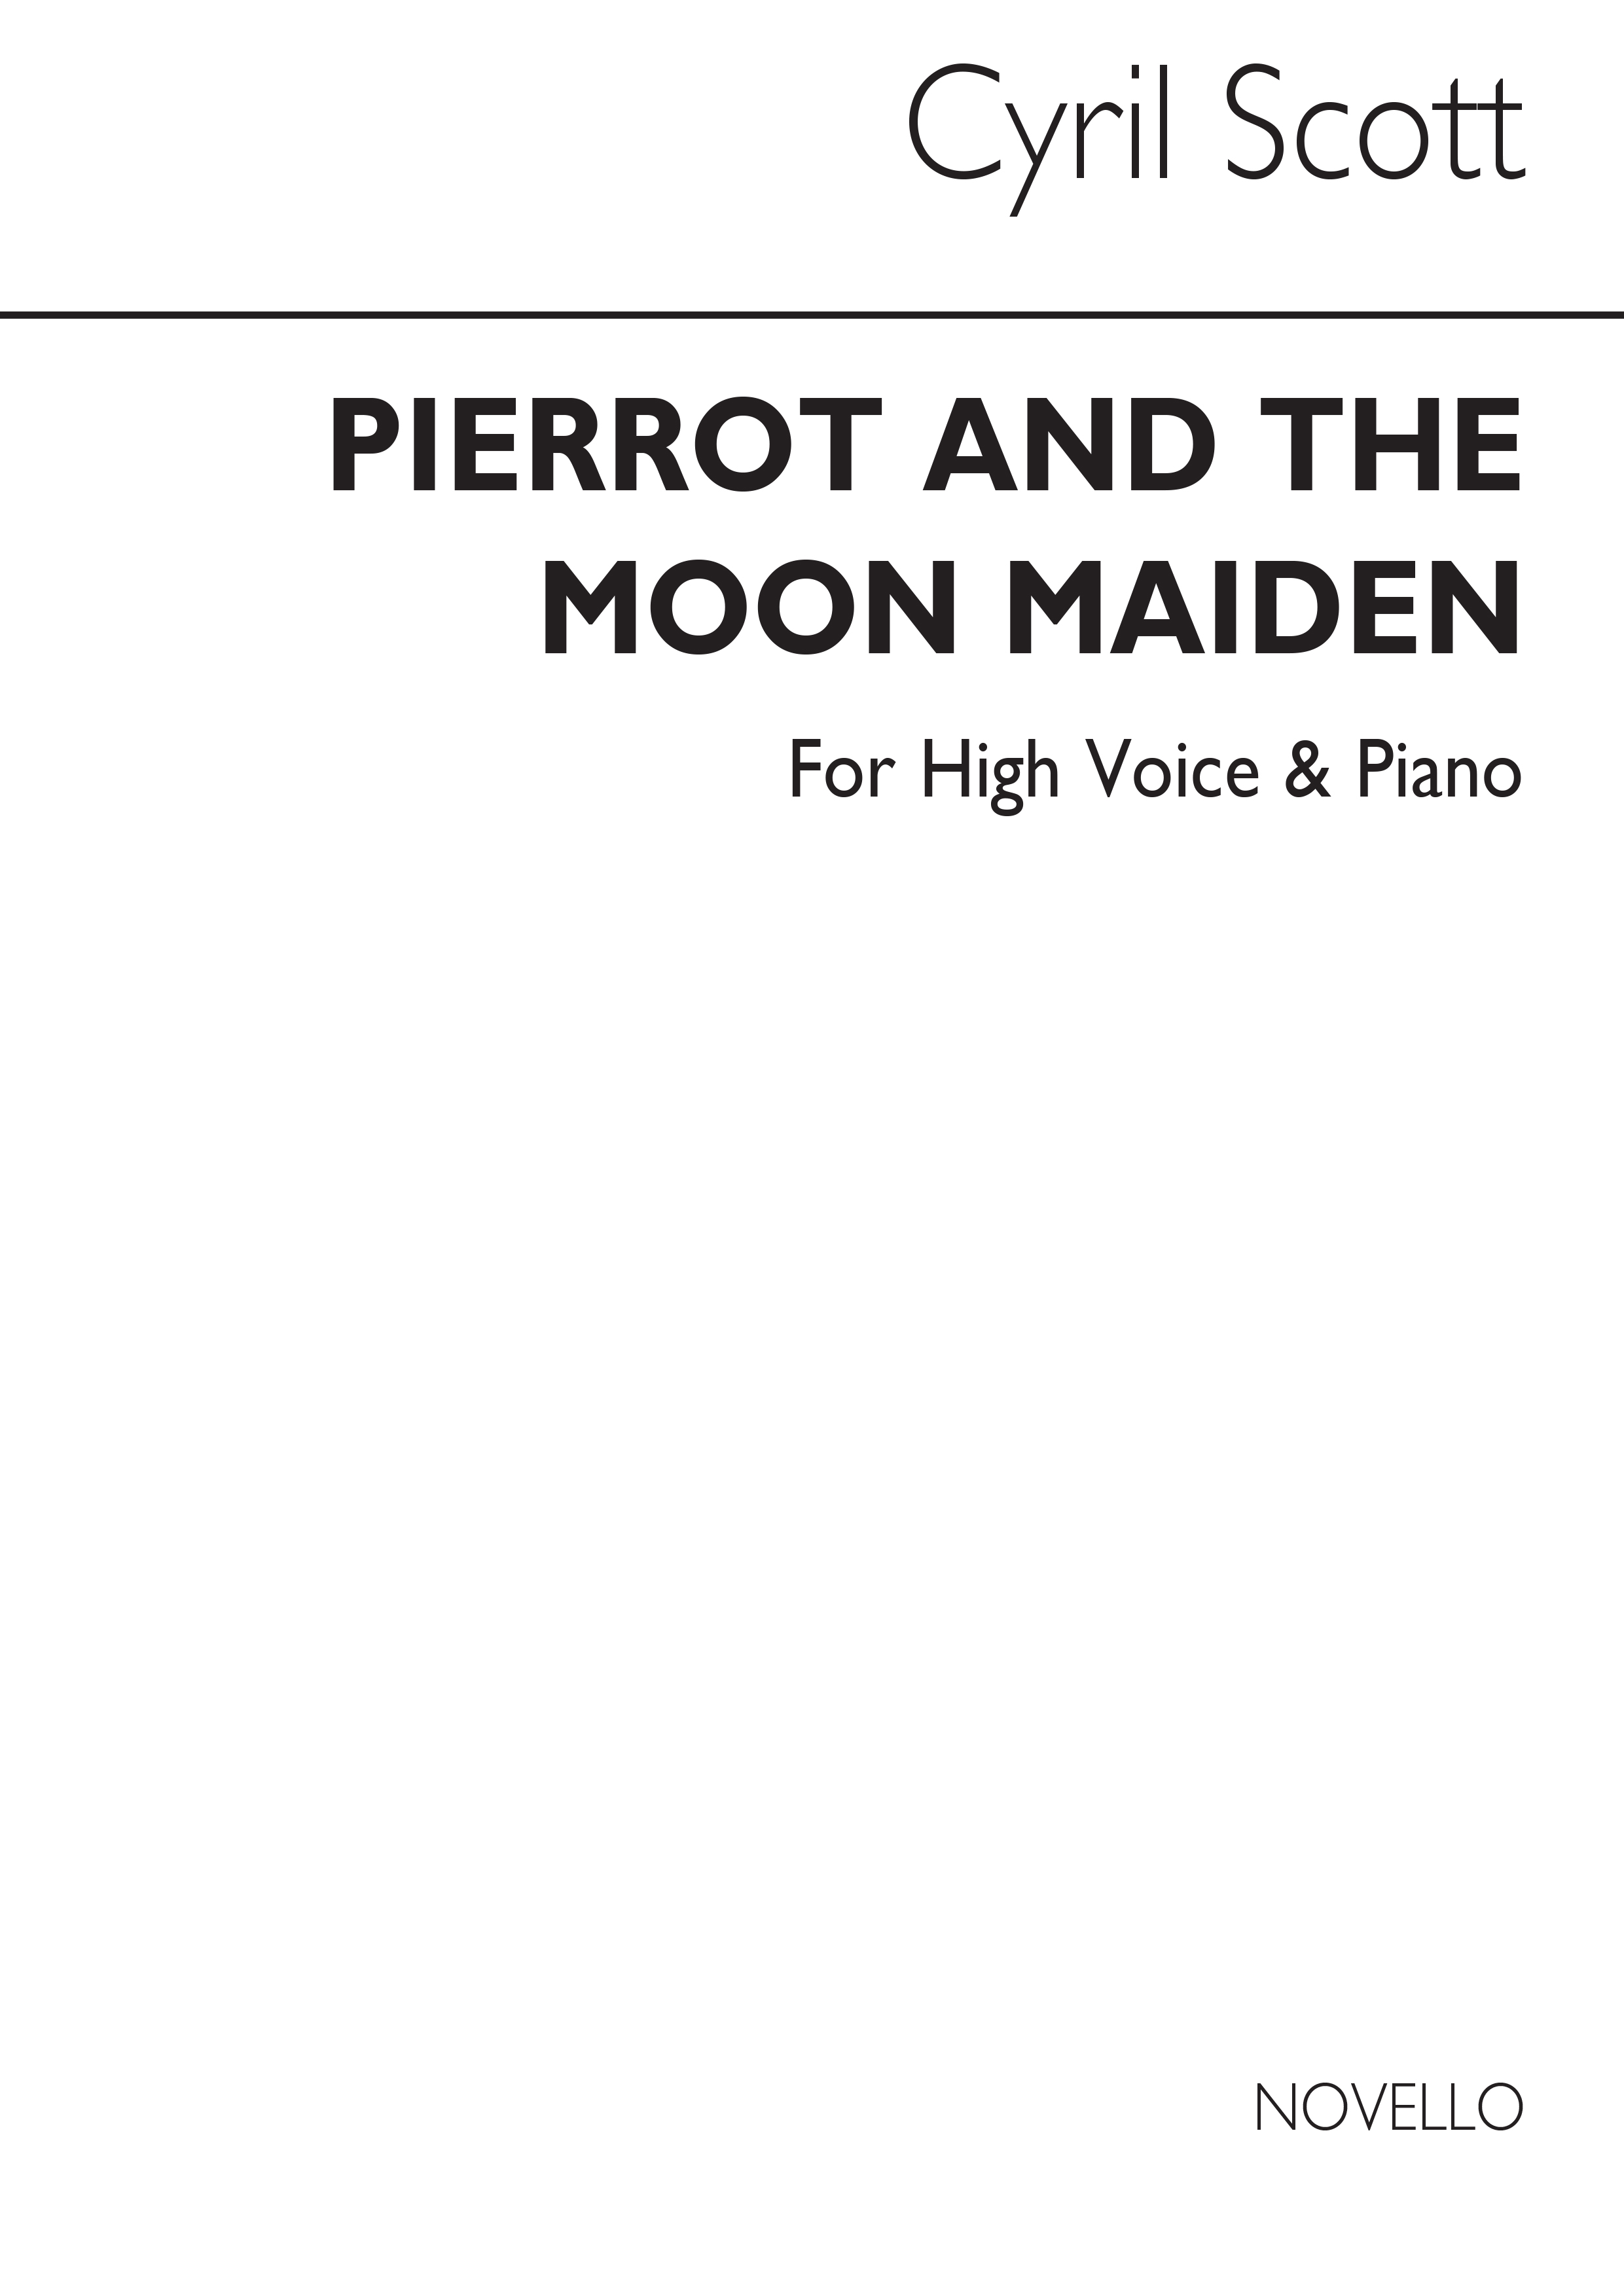 Cyril Scott: Pierrot And The Moon Maiden-high Voice/Piano (Key-e)